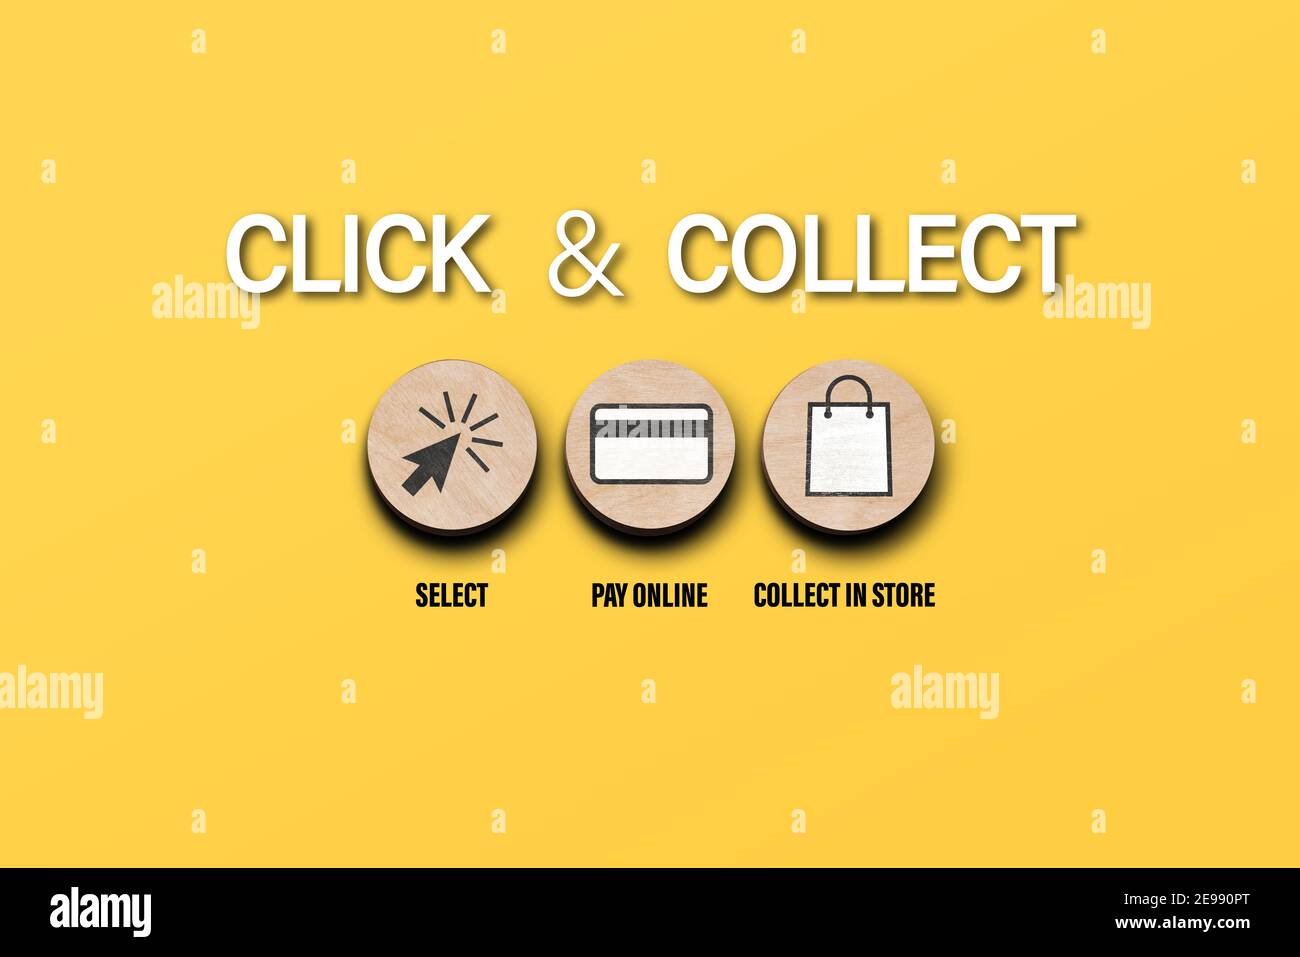 click and collect concept with symbols on round wooden discs on orange background, buying online and picking up in local store Stock Photo